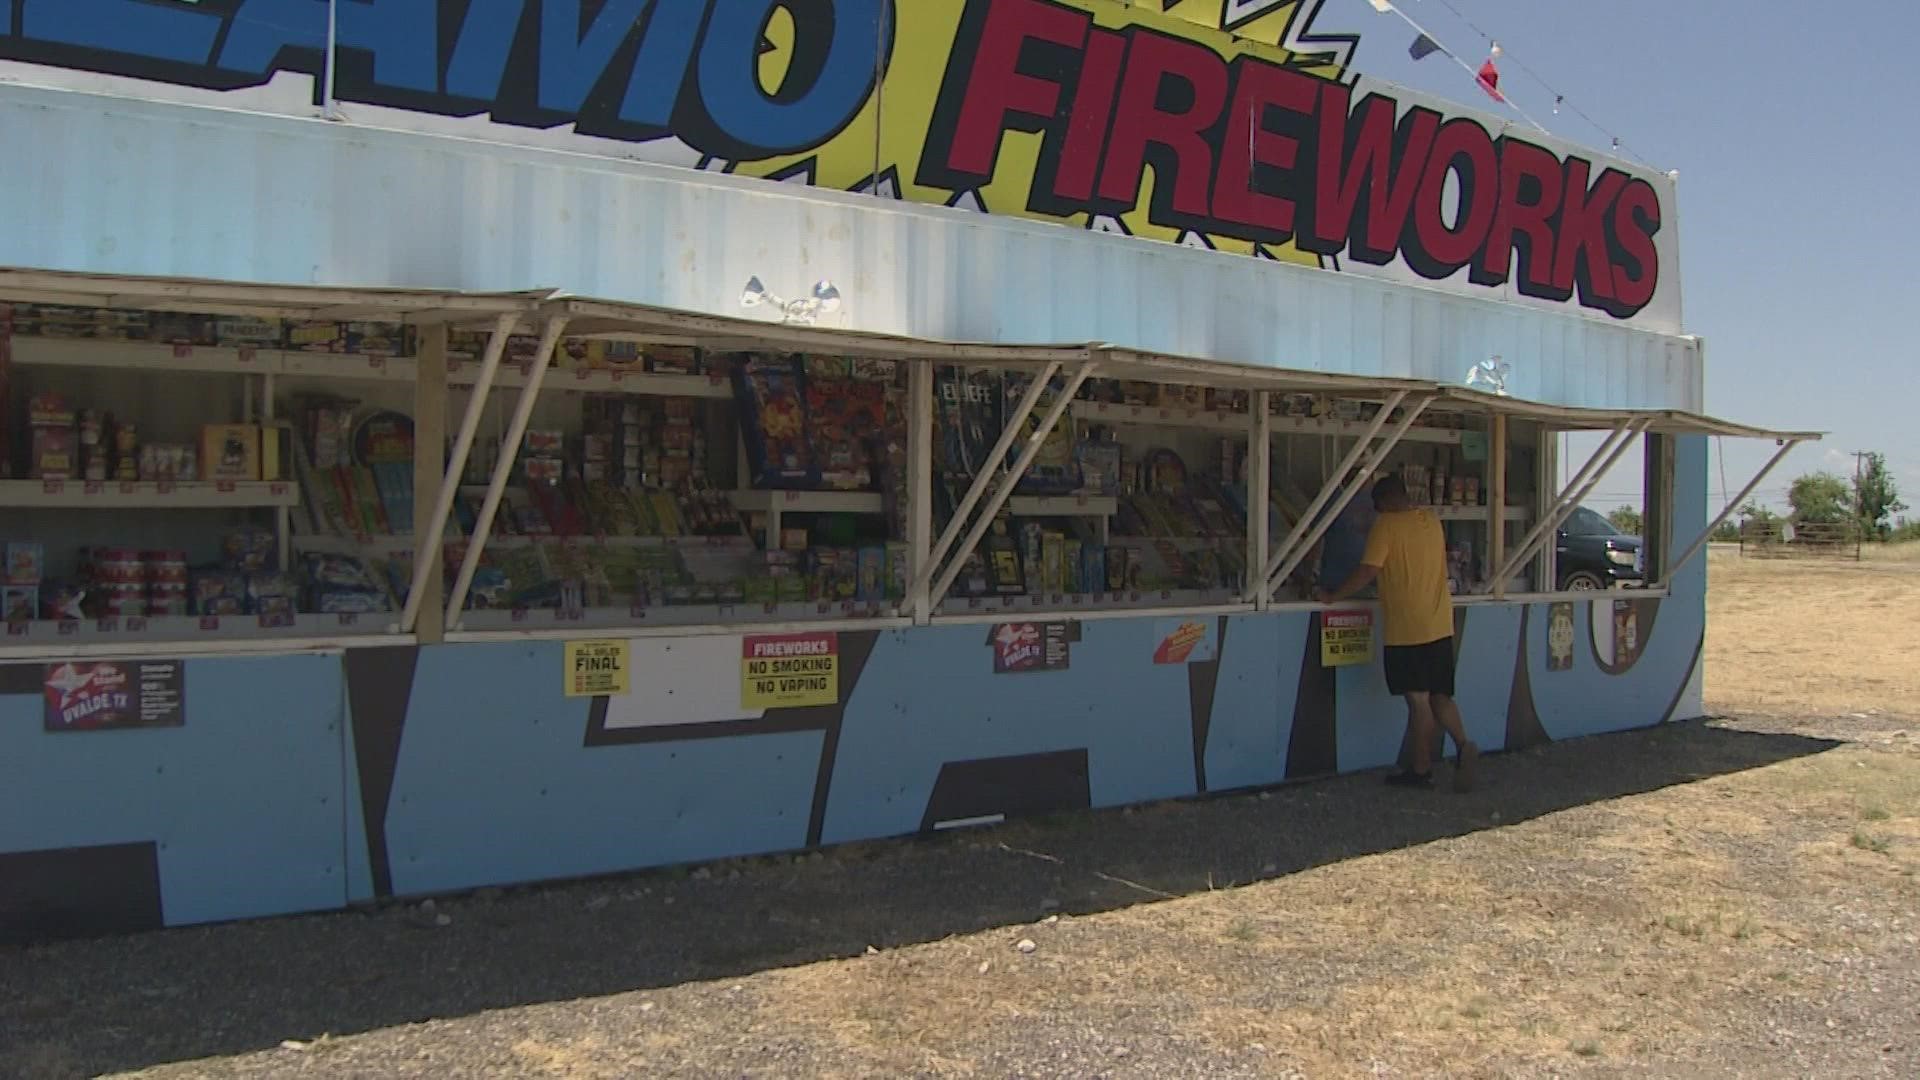 Fire Marshal Sean Hughes says a countywide fireworks ban is in place from now through Sept 6. That means no discharging fireworks at home due to dry conditions.